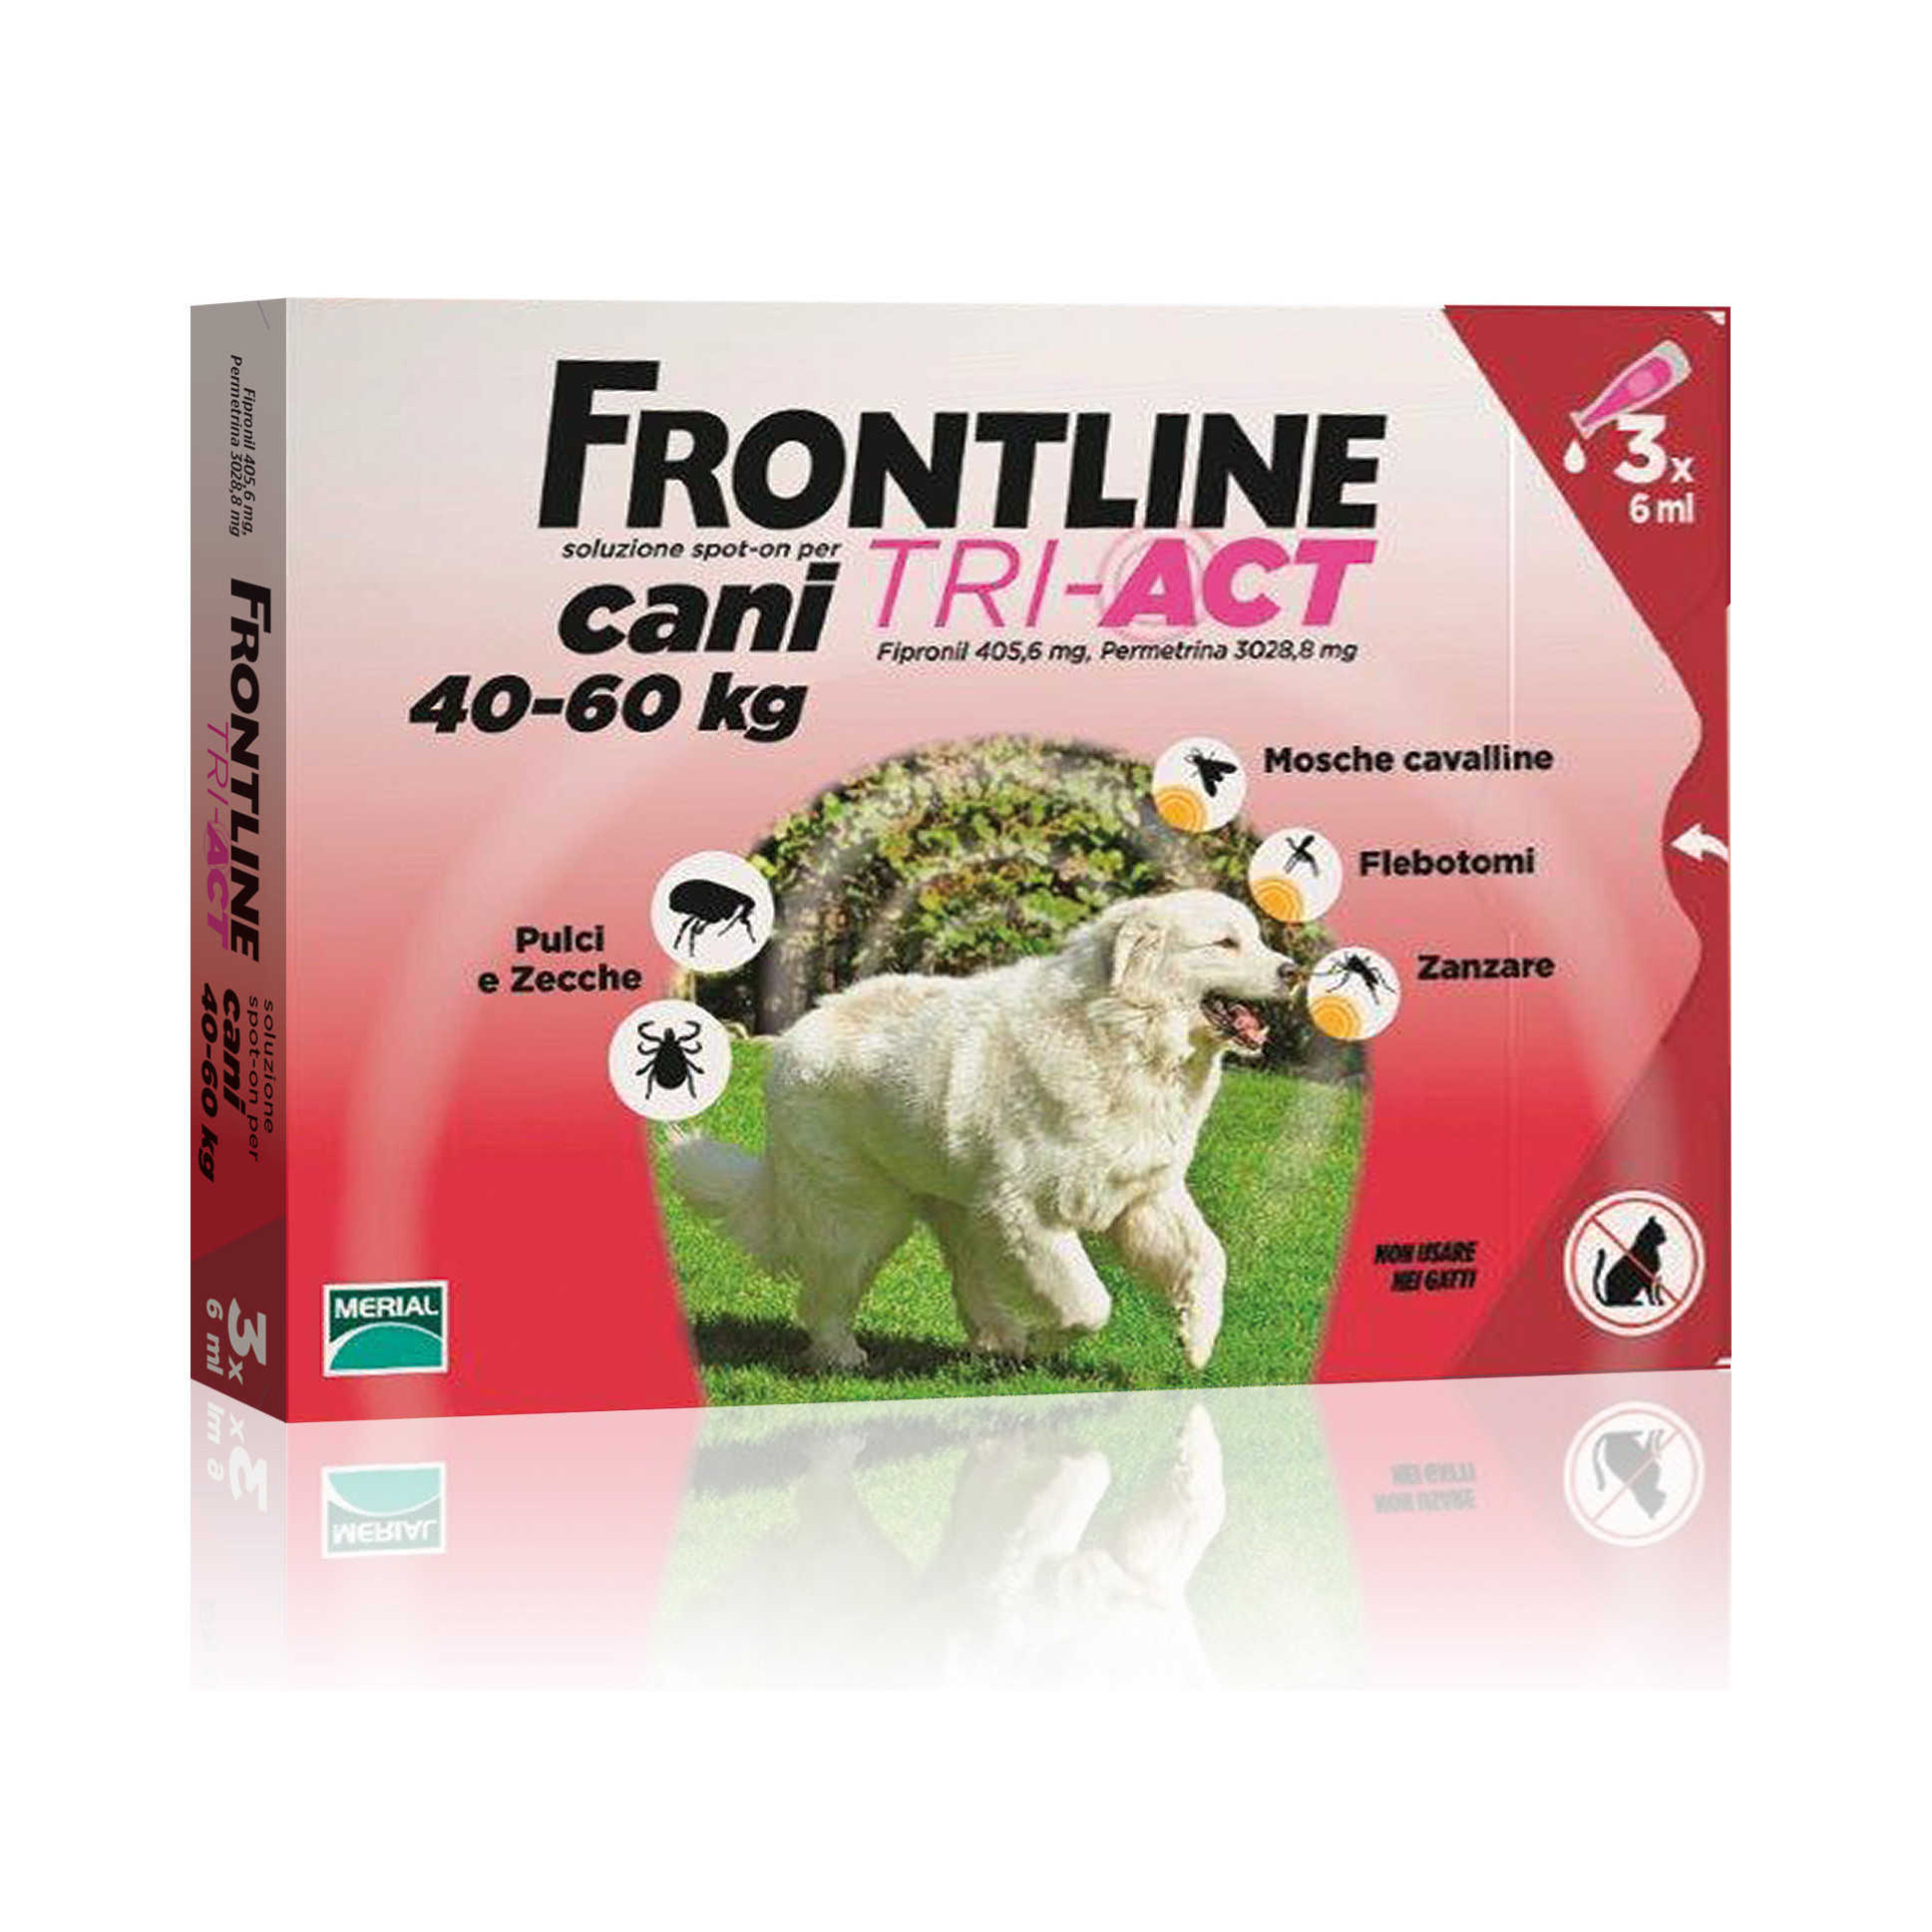 Frontline Combo - Tri Act - Cani 40-60 kg